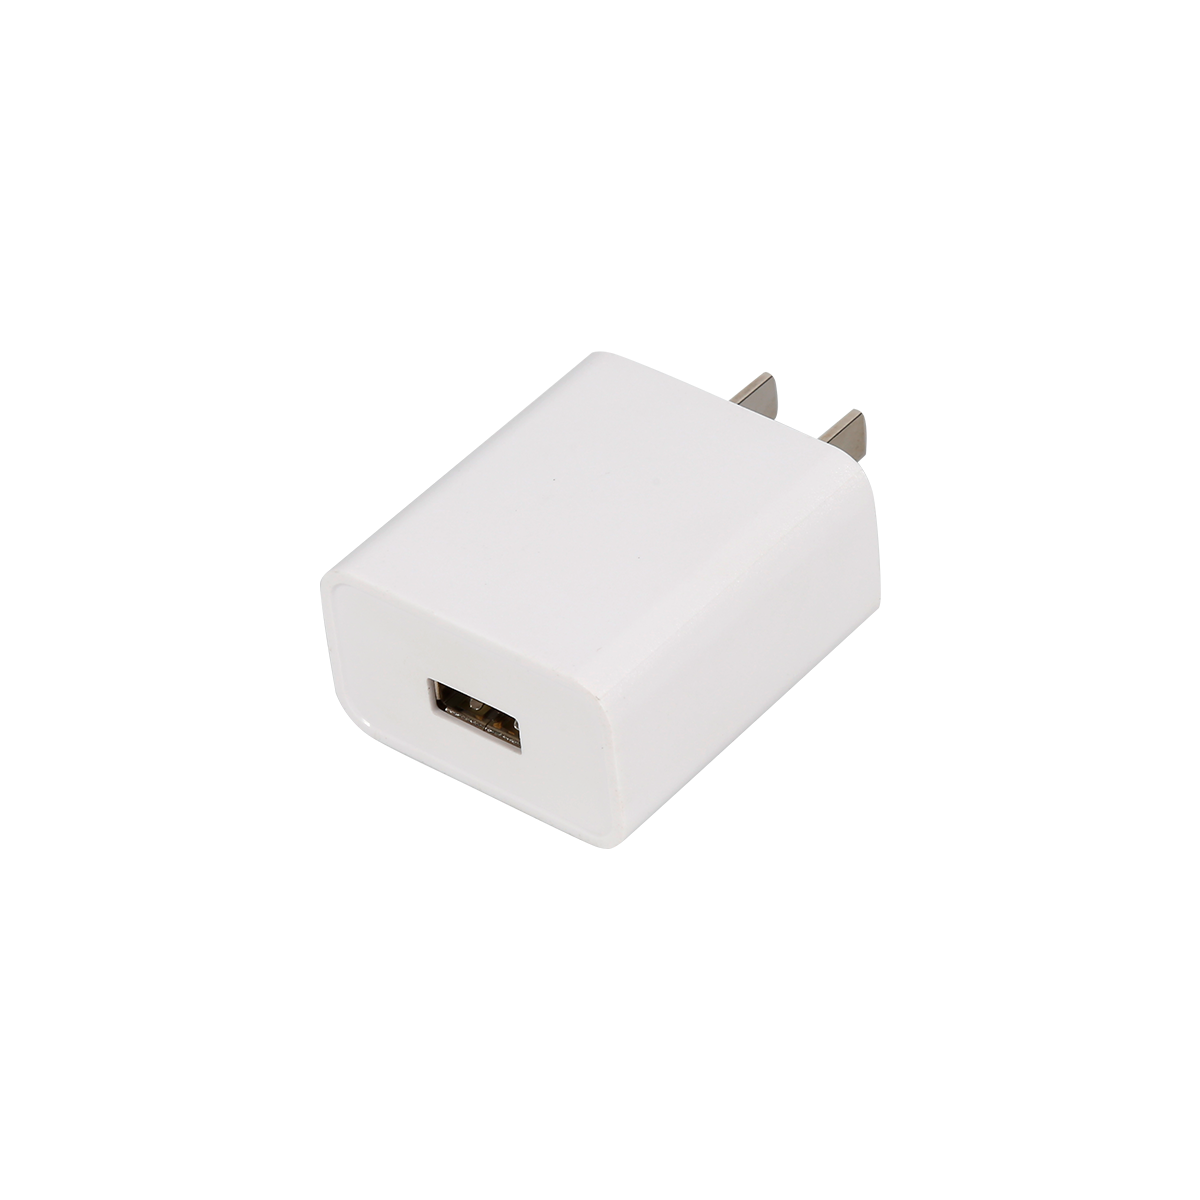 Is there a difference between USB interface charging and USB charger charging?india plug charger pri(图1)